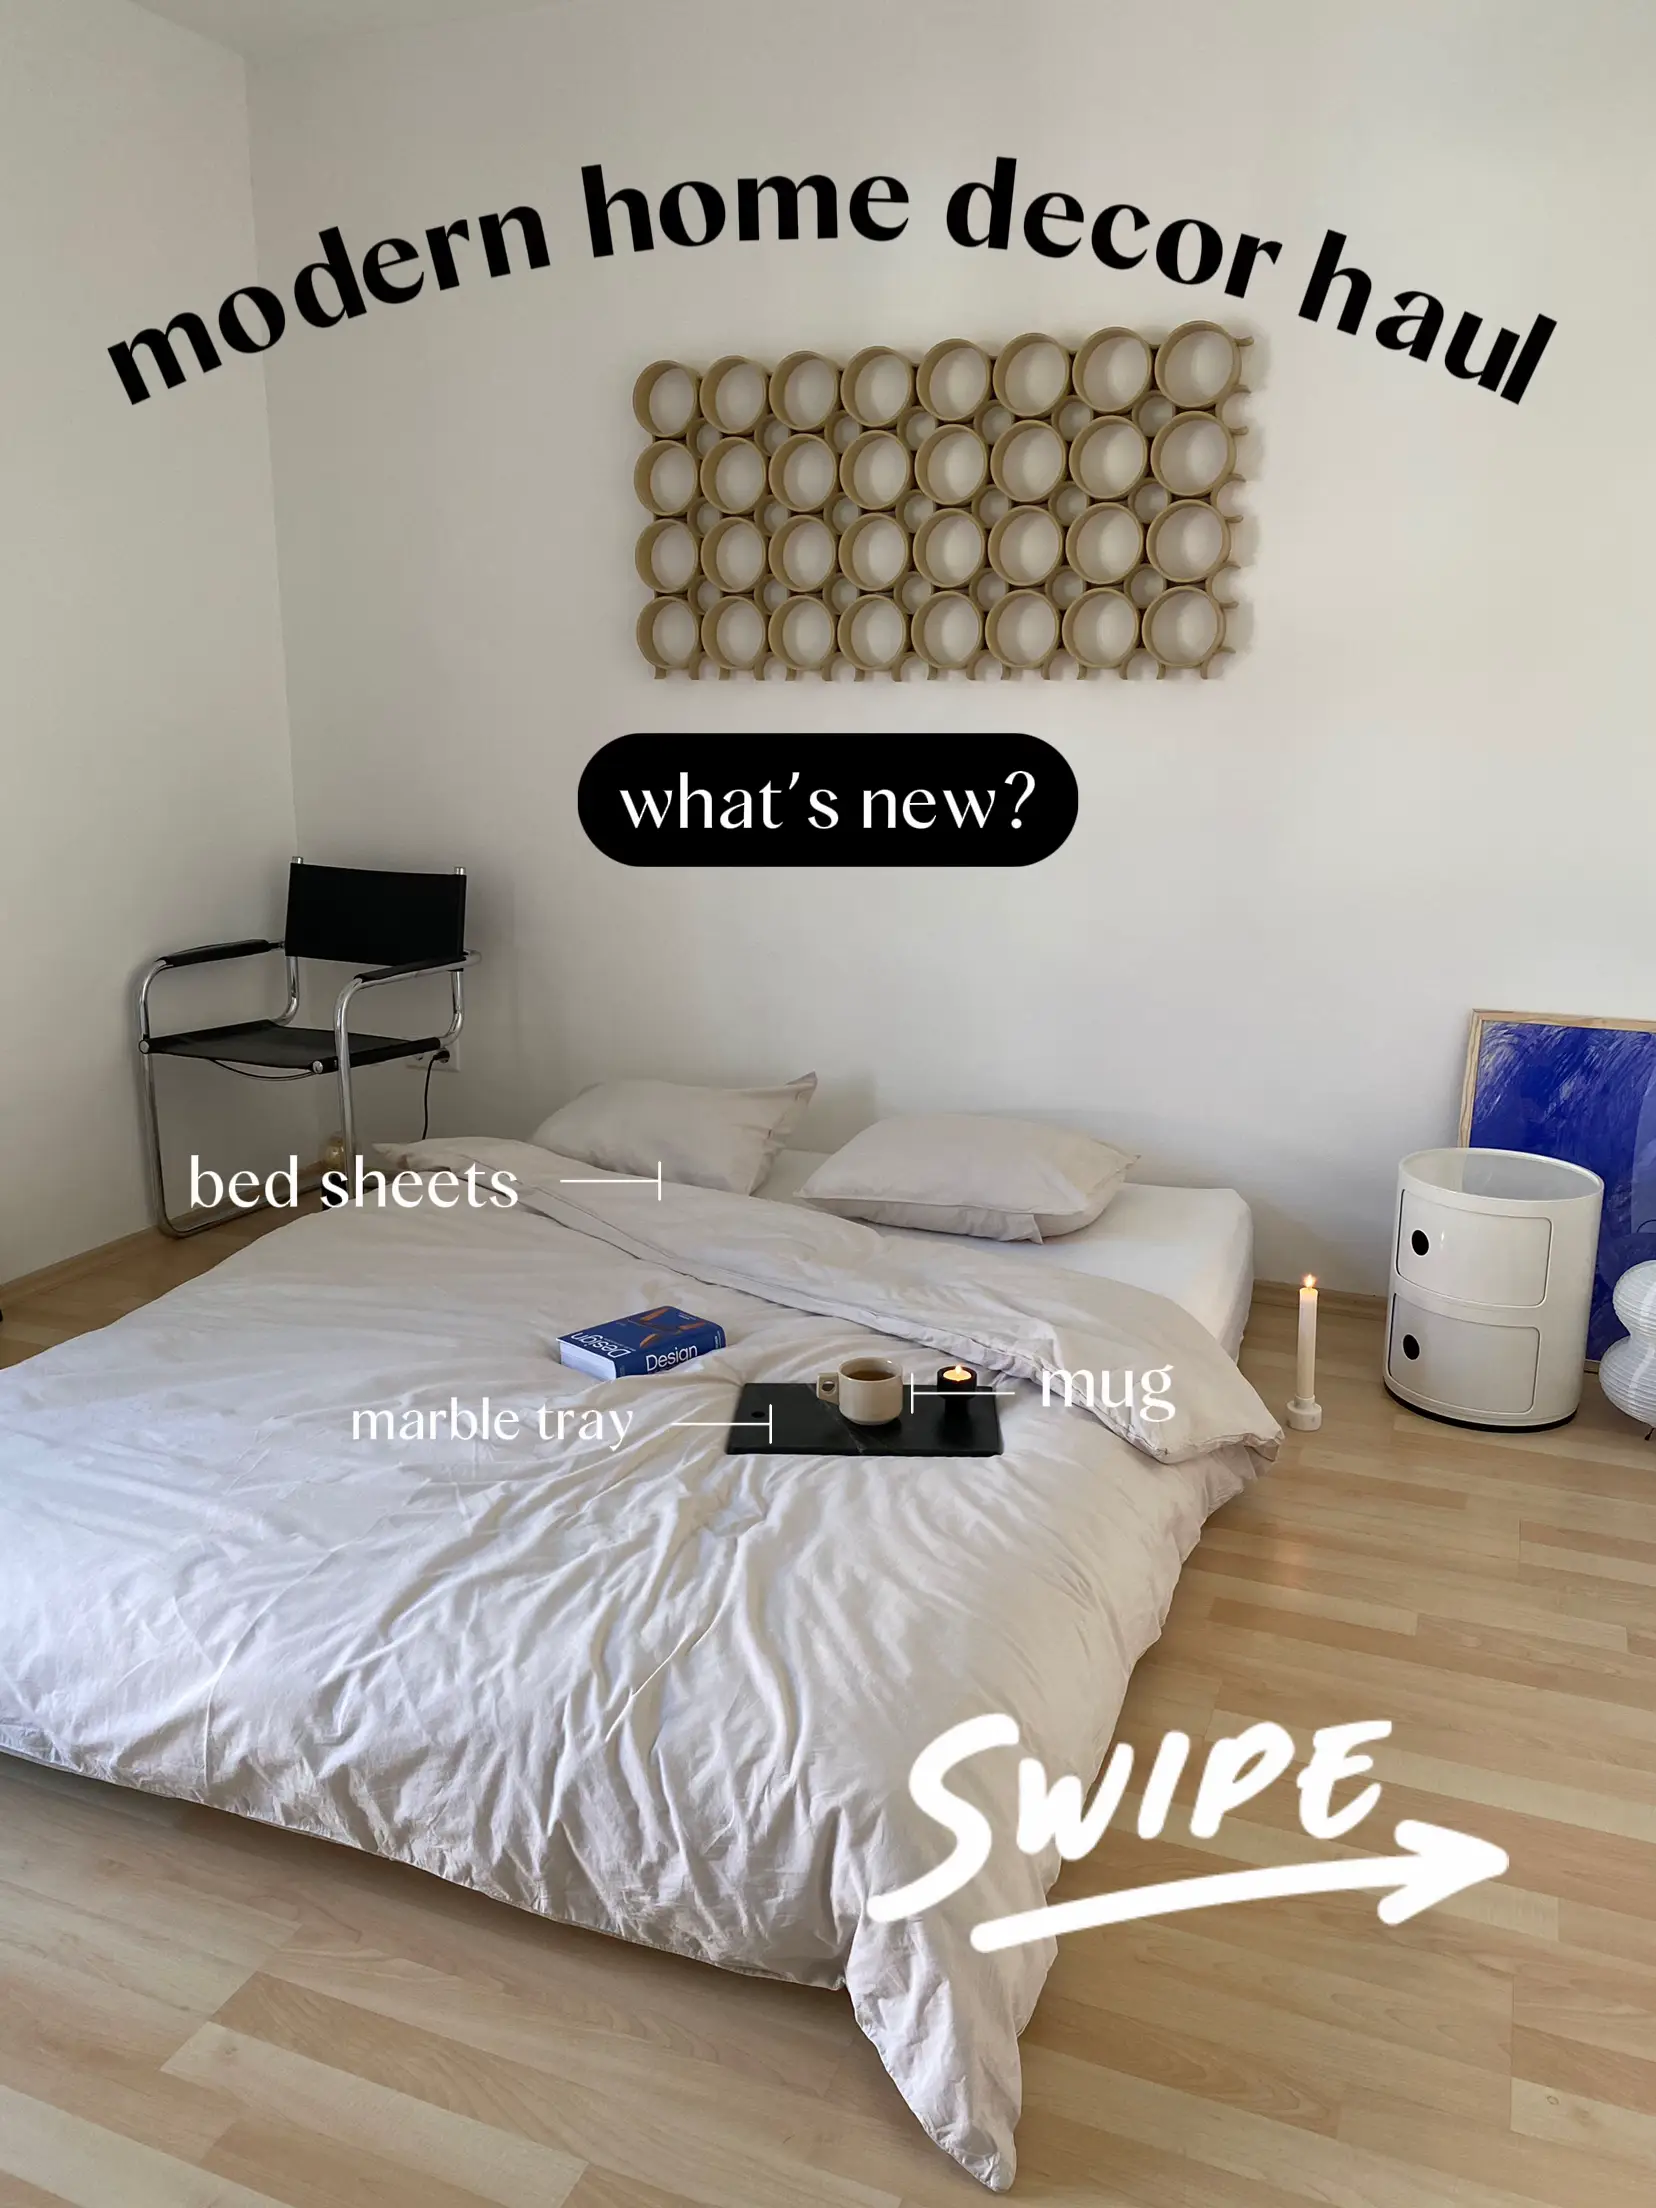 modern home decor haul, Gallery posted by aylins.interior